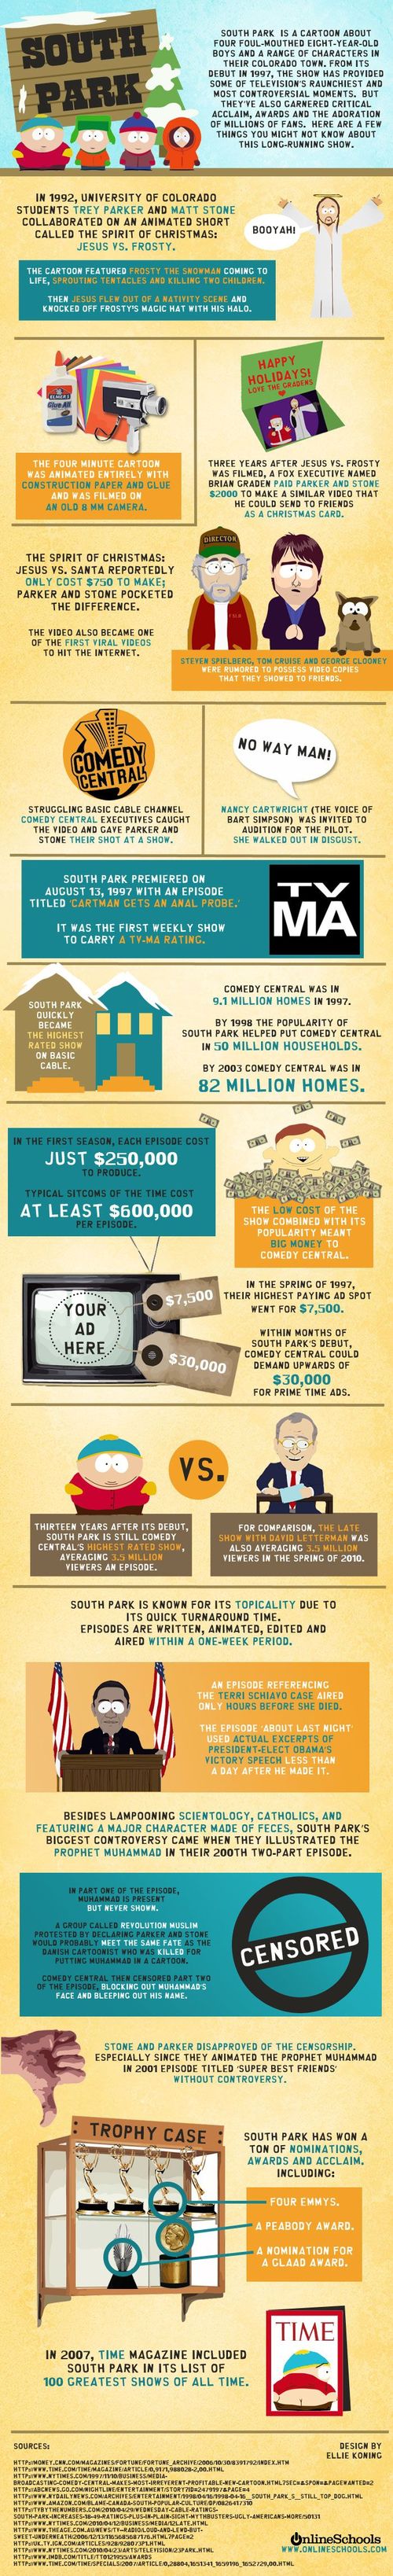 Fun Facts About South Park [Infographic]